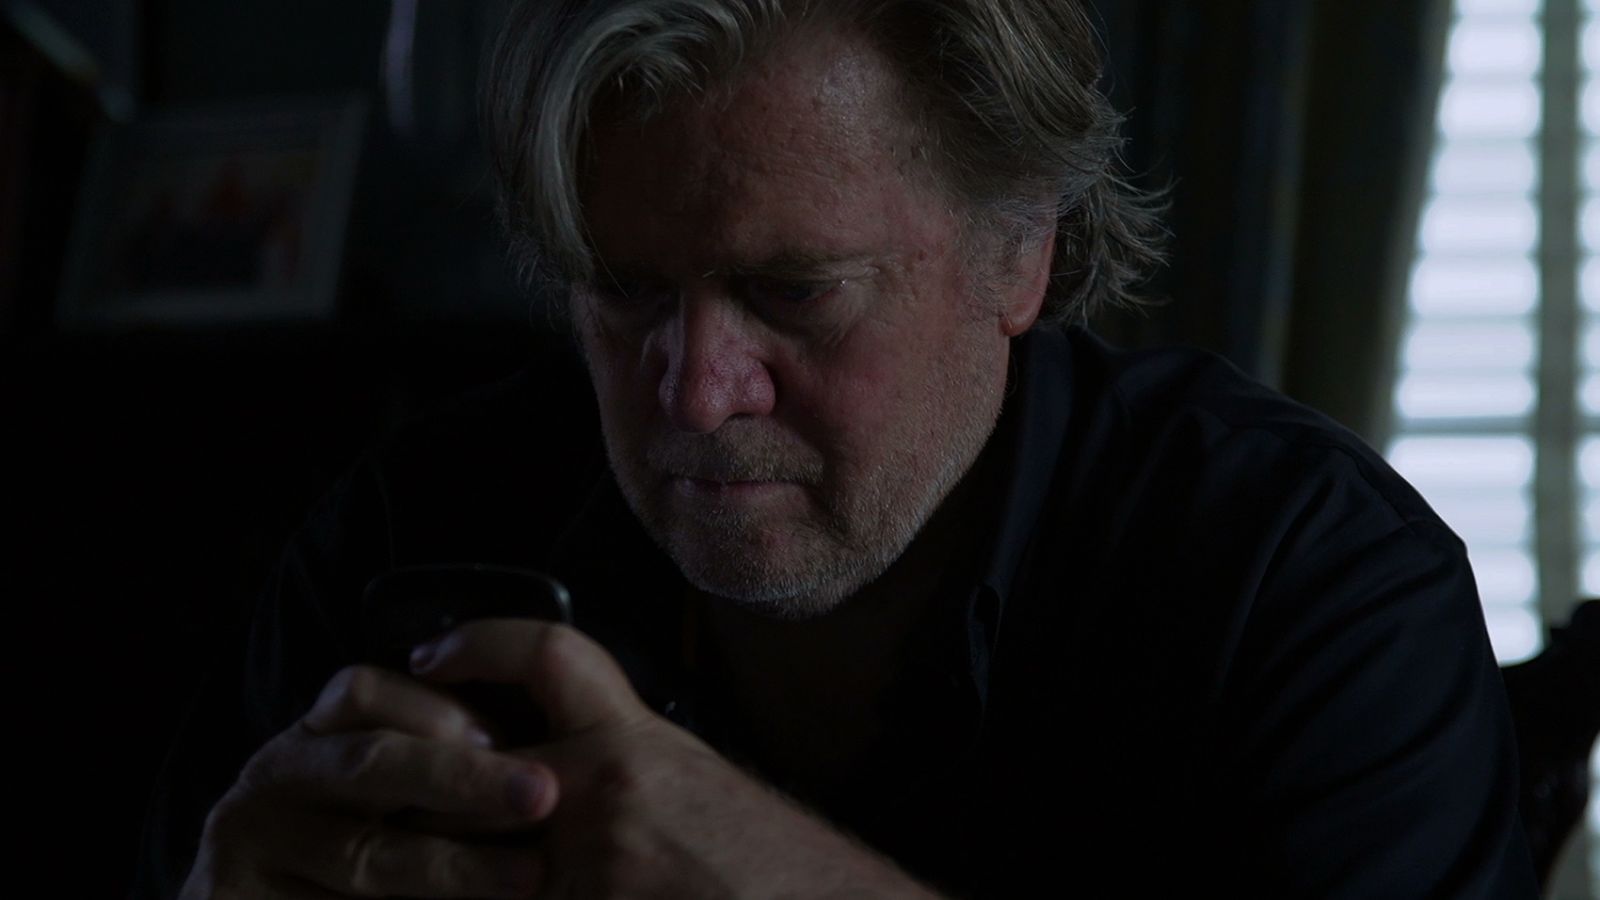 Steve Bannon in THE BRINK, a Magnolia Pictures release. Photo courtesy of Magnolia Pictures